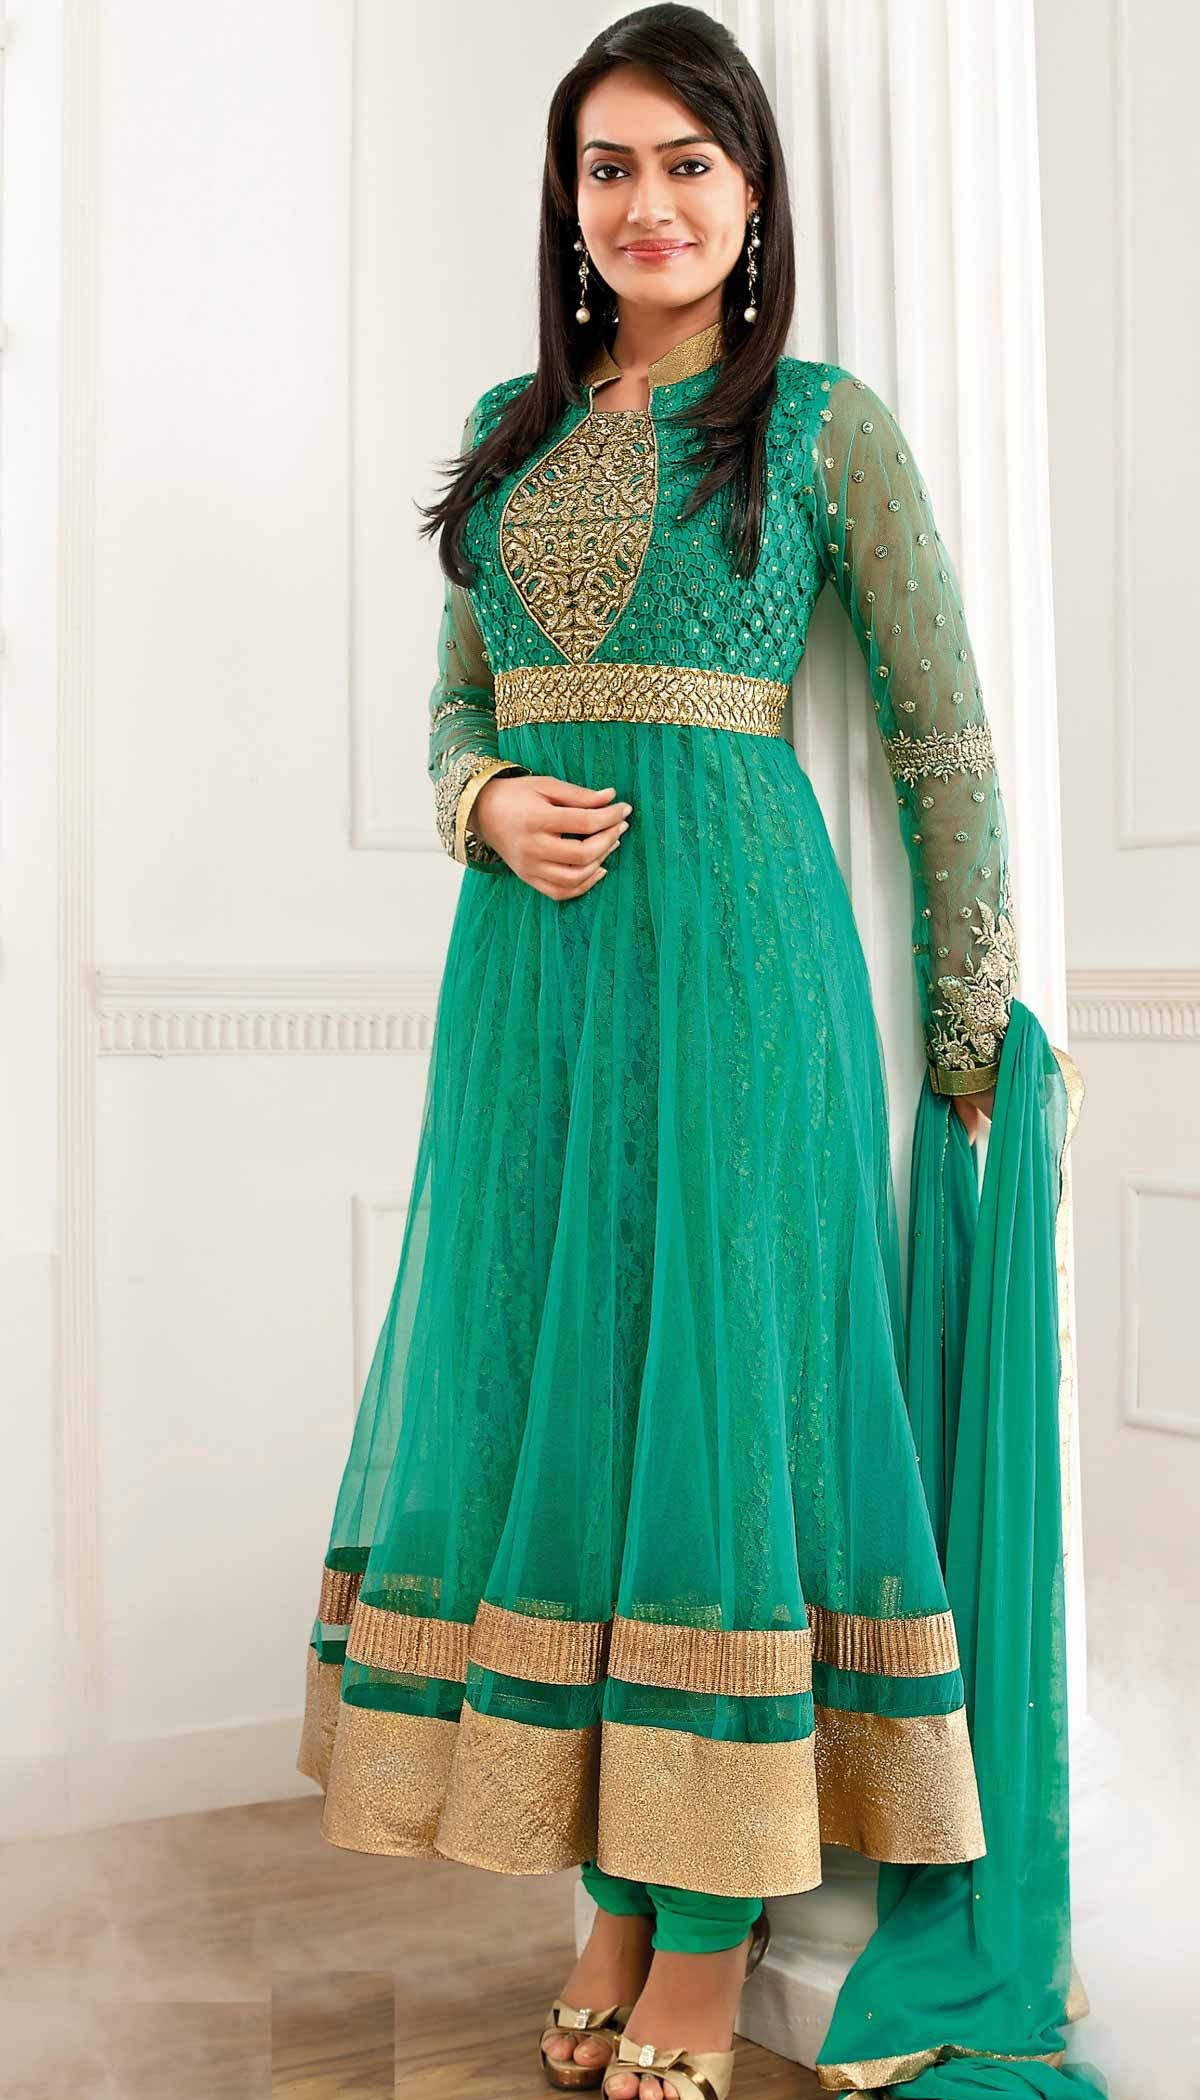 Surbhi Looking Adorable In Green Dress